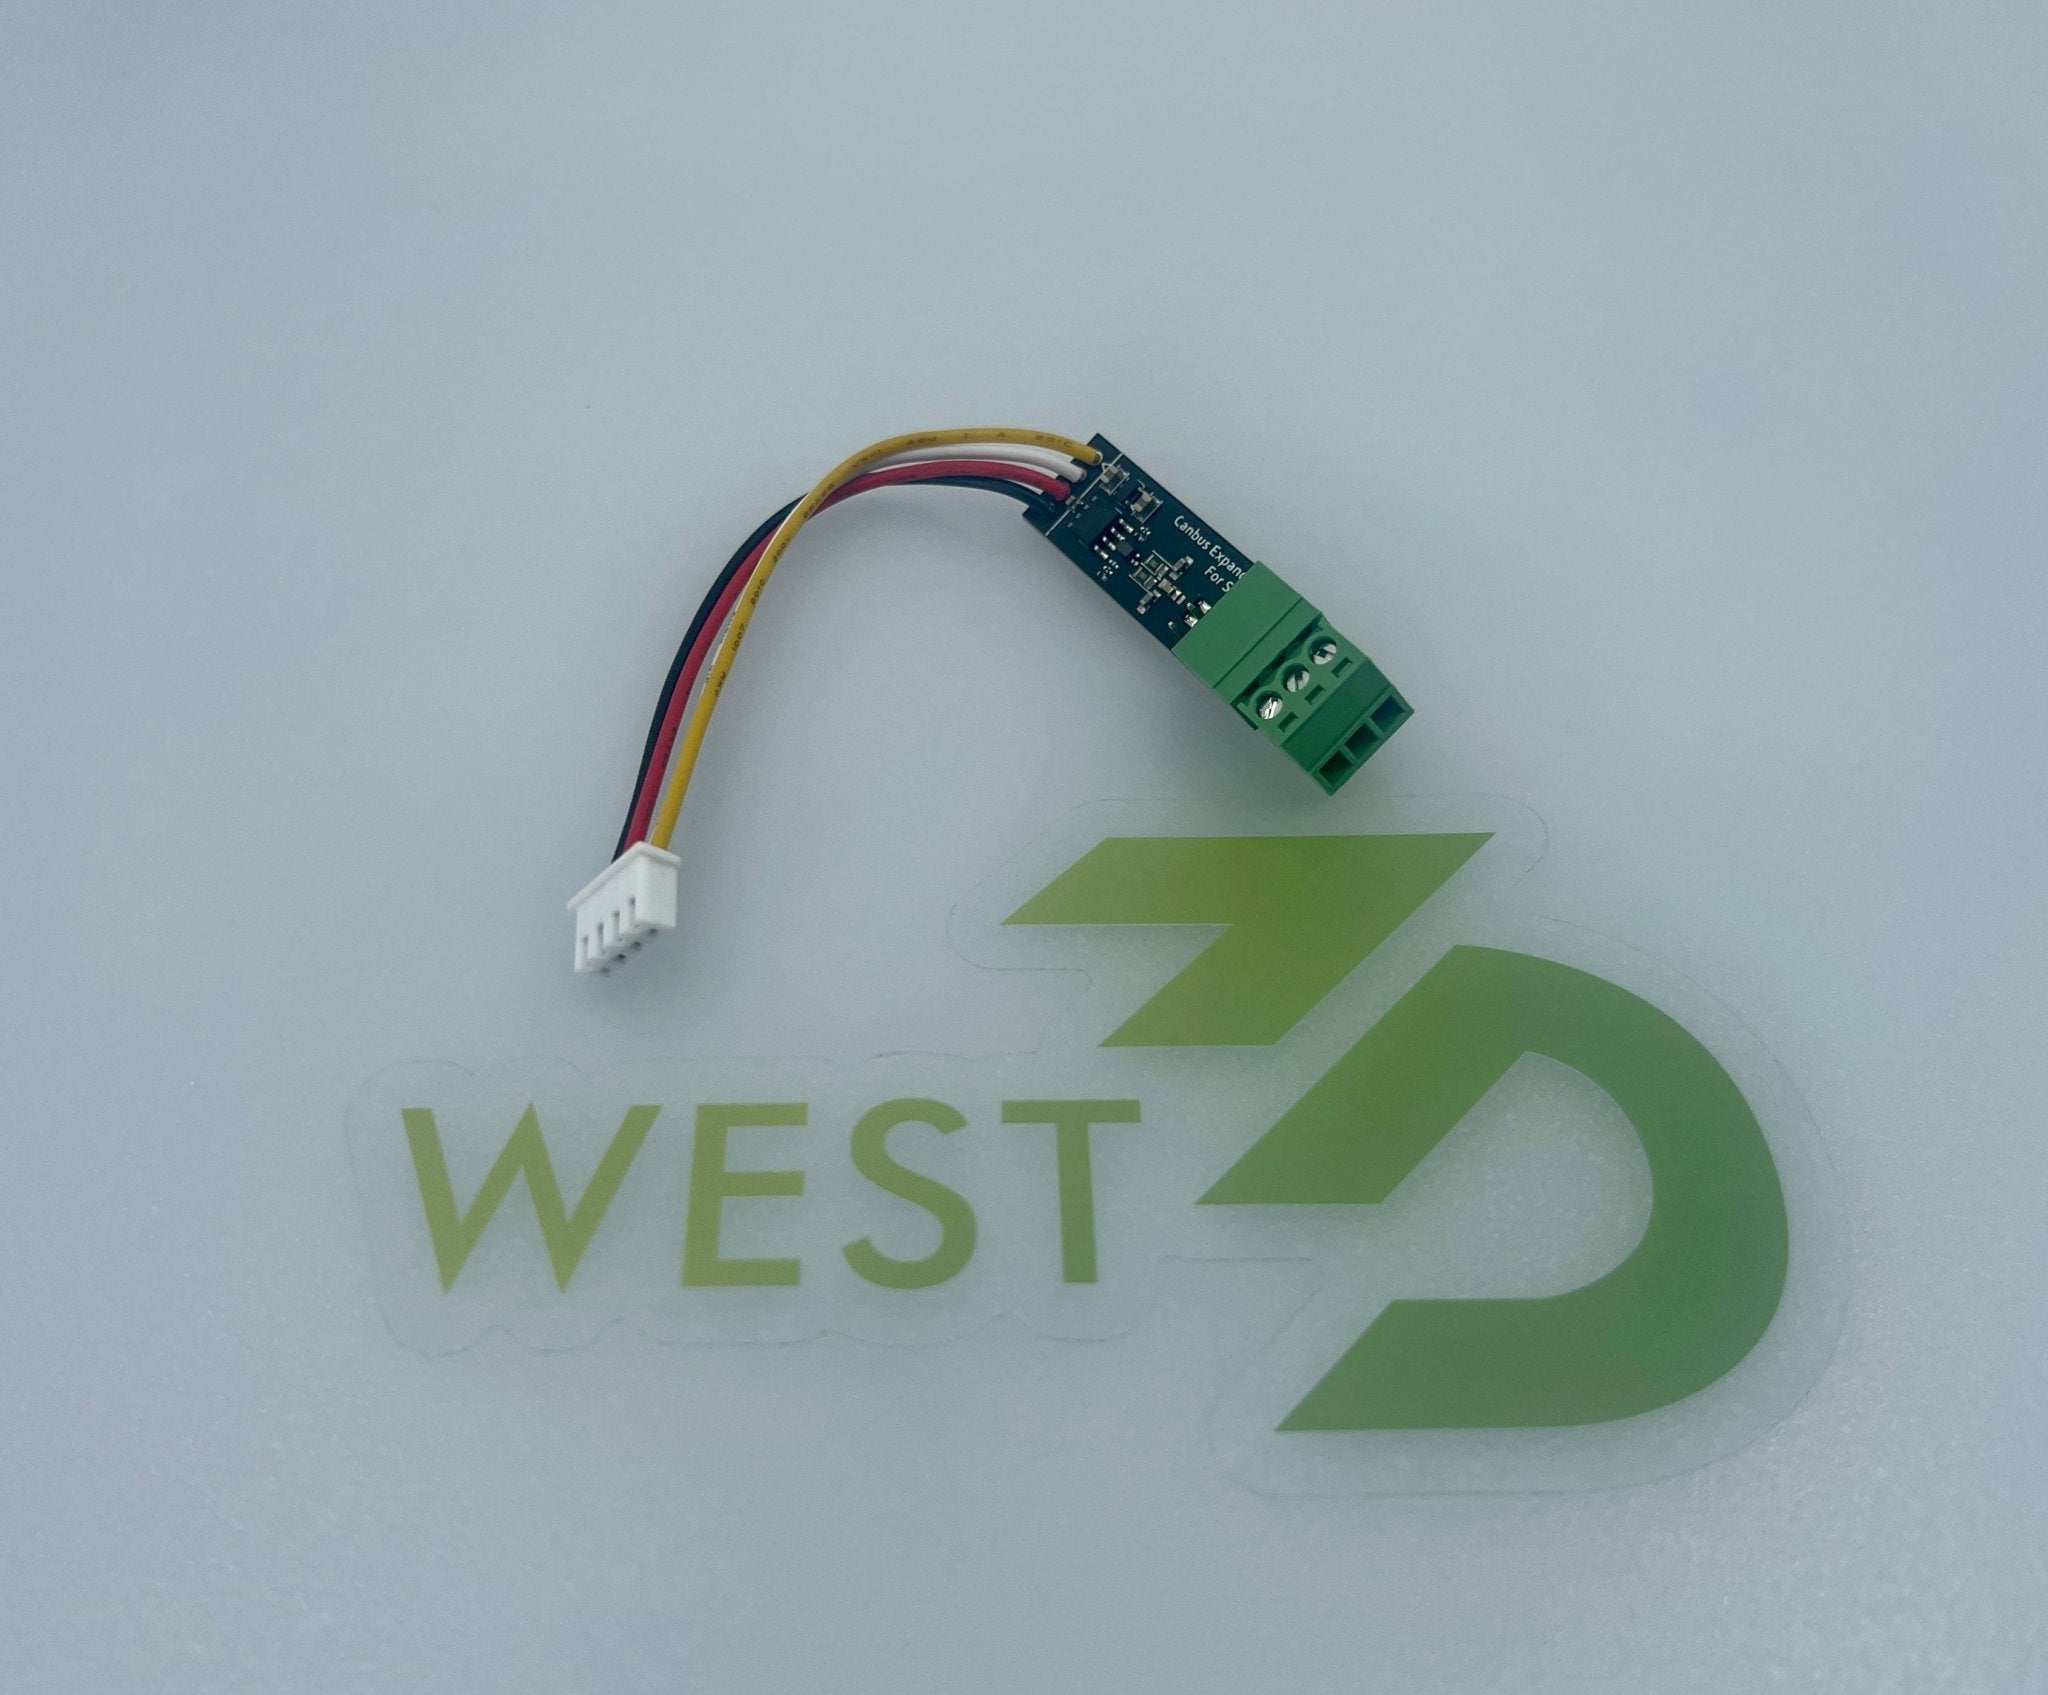 Fystec CAN bus expander module for Spider MCU Controller Boards - West3D Printing - FYSETC